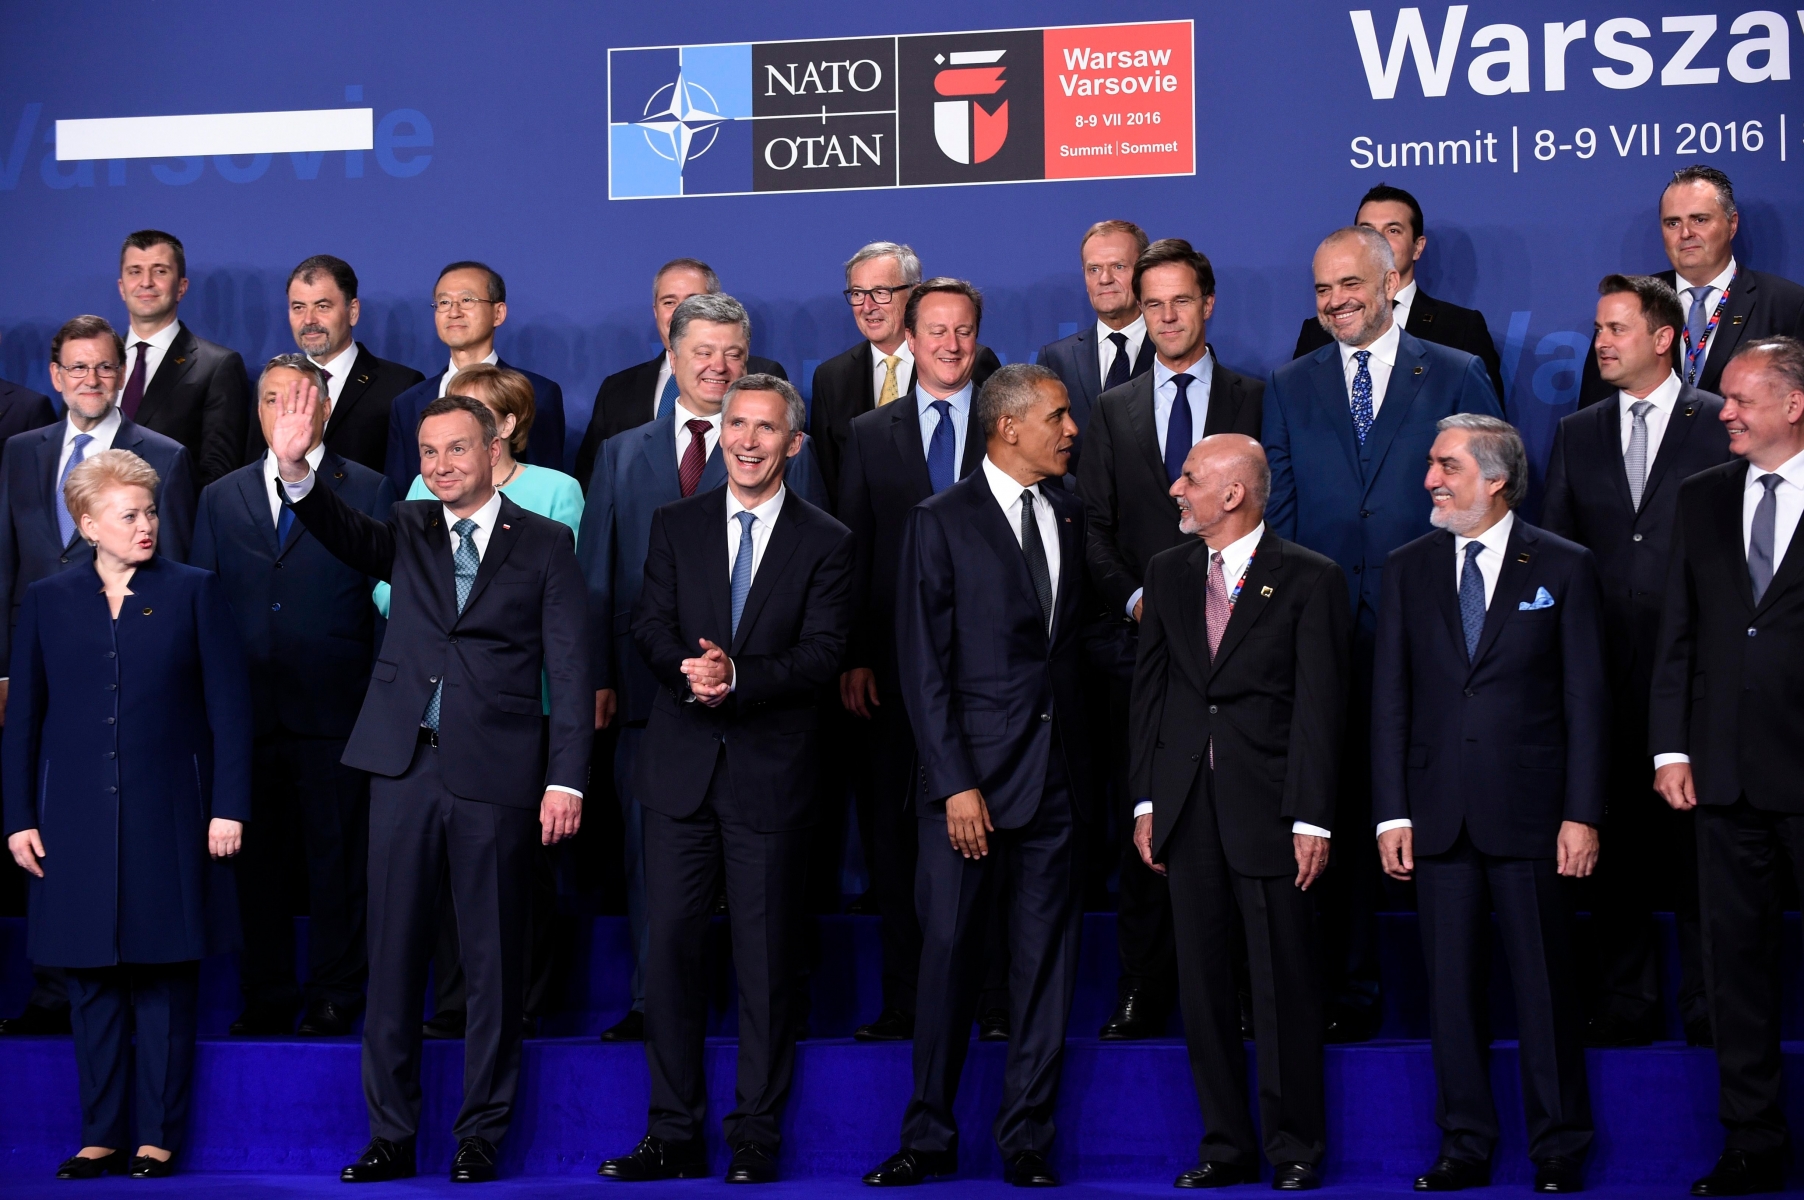 President Barack Obama, center, participates in a NATO family photo at PGE National Stadium in Warsaw, Poland, Friday, July 8, 2016. Obama is in Warsaw to attend the NATO Summit. Front row, from left are, Lithuanian President Dalia Grybauskaitė, Polish President Andrzej Duda, NATO Secretary General Jens Stoltenberg, Obama and Afghanistan's President Ashraf Ghani is right of Obama. Afghanistan's Chief Executive Dr. Abdullah Abdullah, second from right front. (AP Photo/Susan Walsh) Obama US Poland NATO